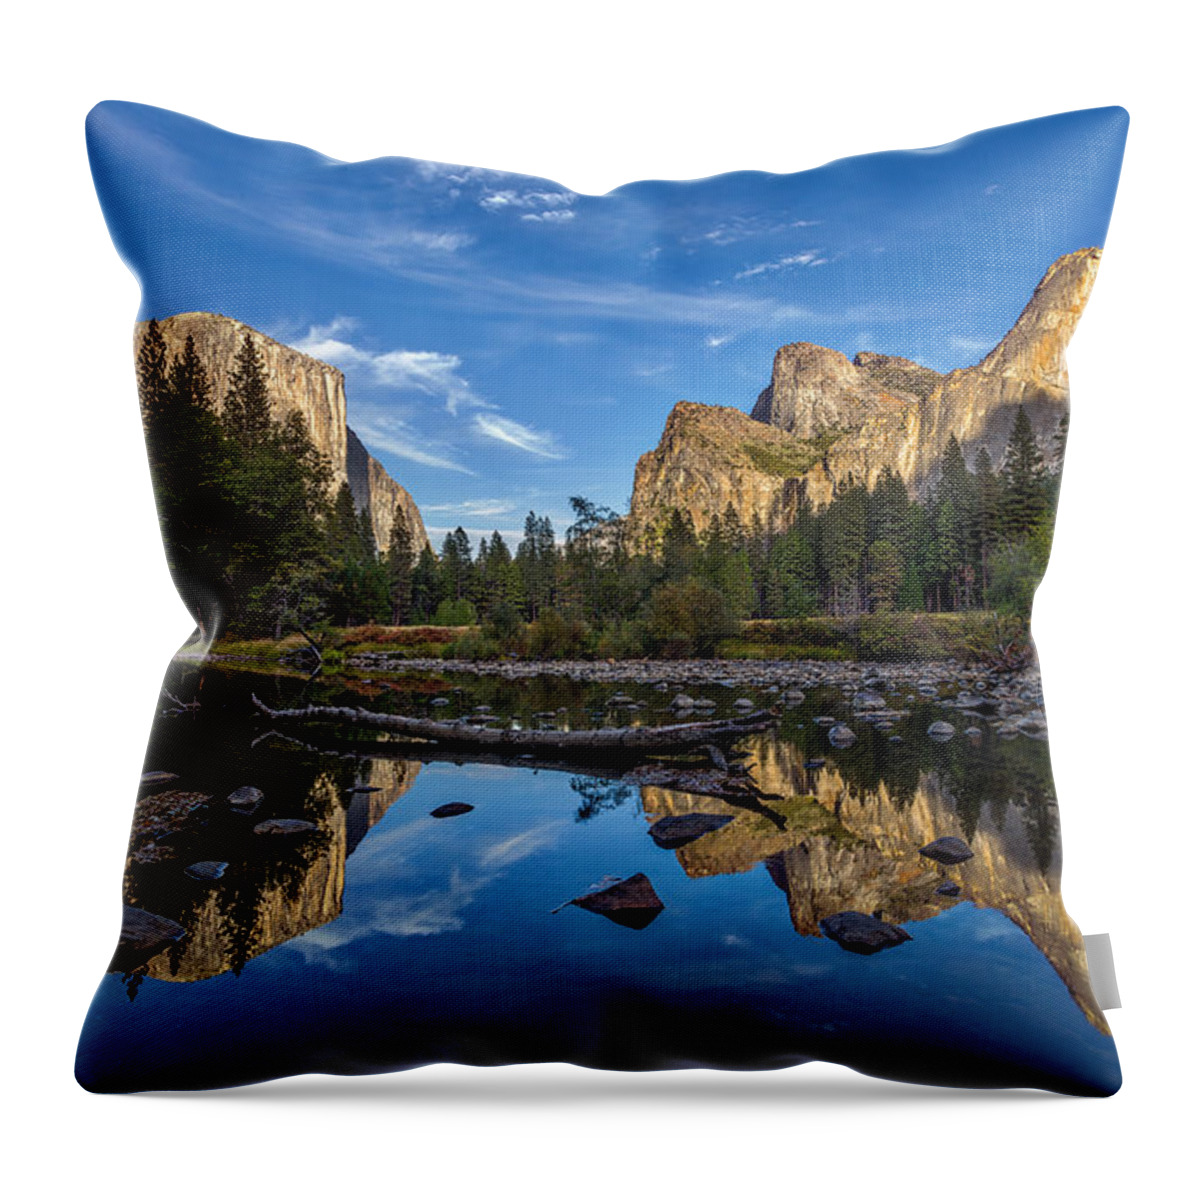 California Throw Pillow featuring the photograph Valley View I by Peter Tellone